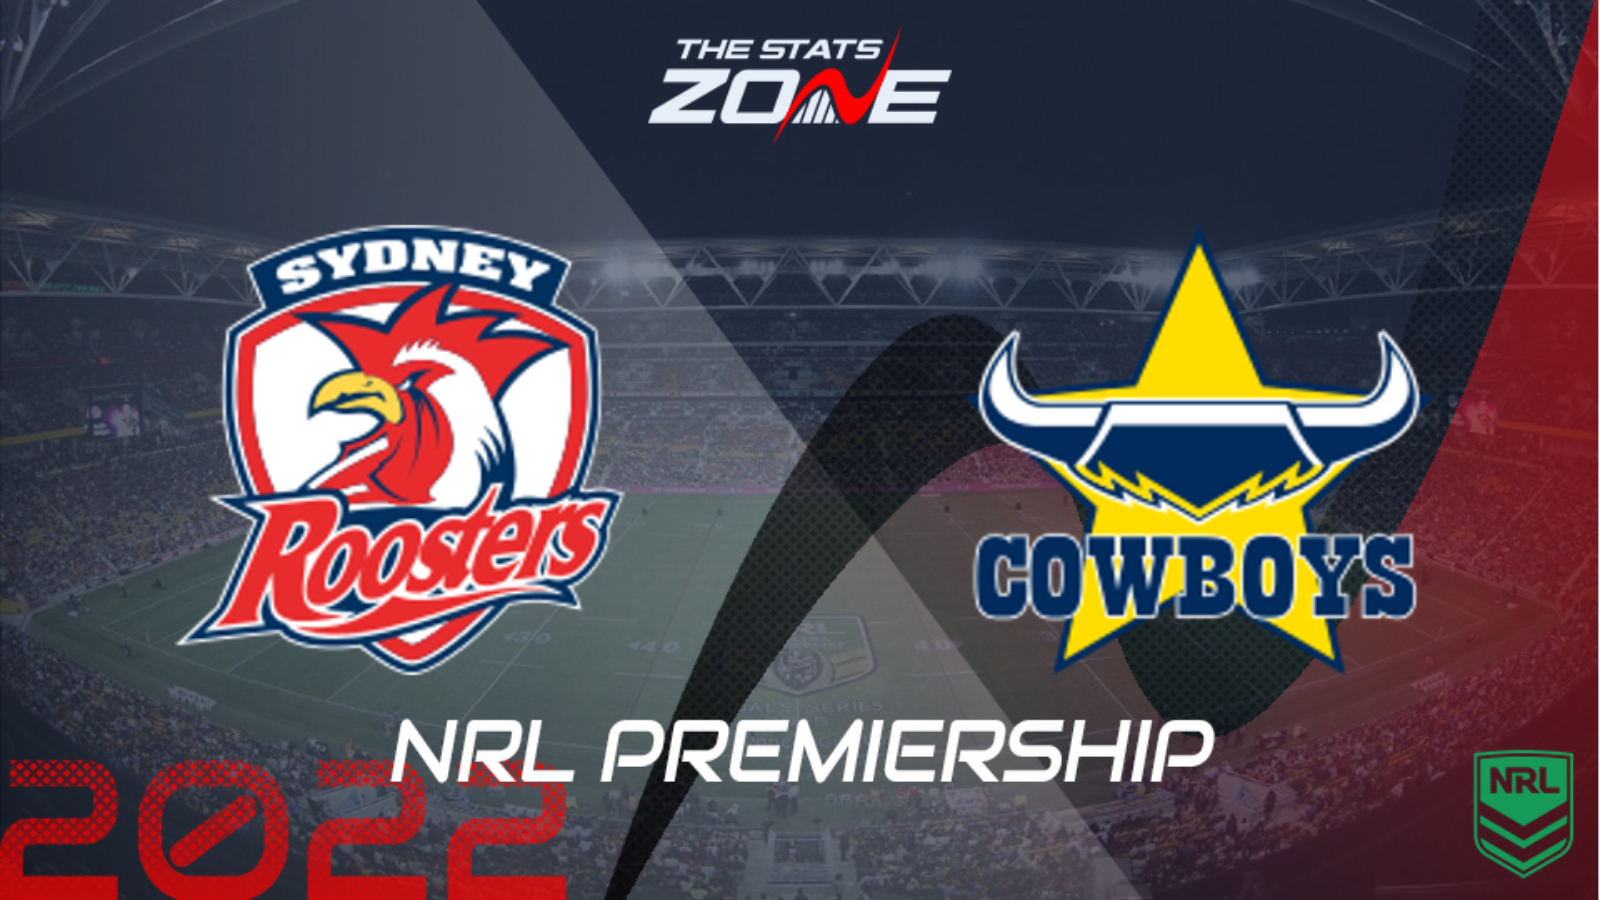 Sydney Roosters Wallpapers